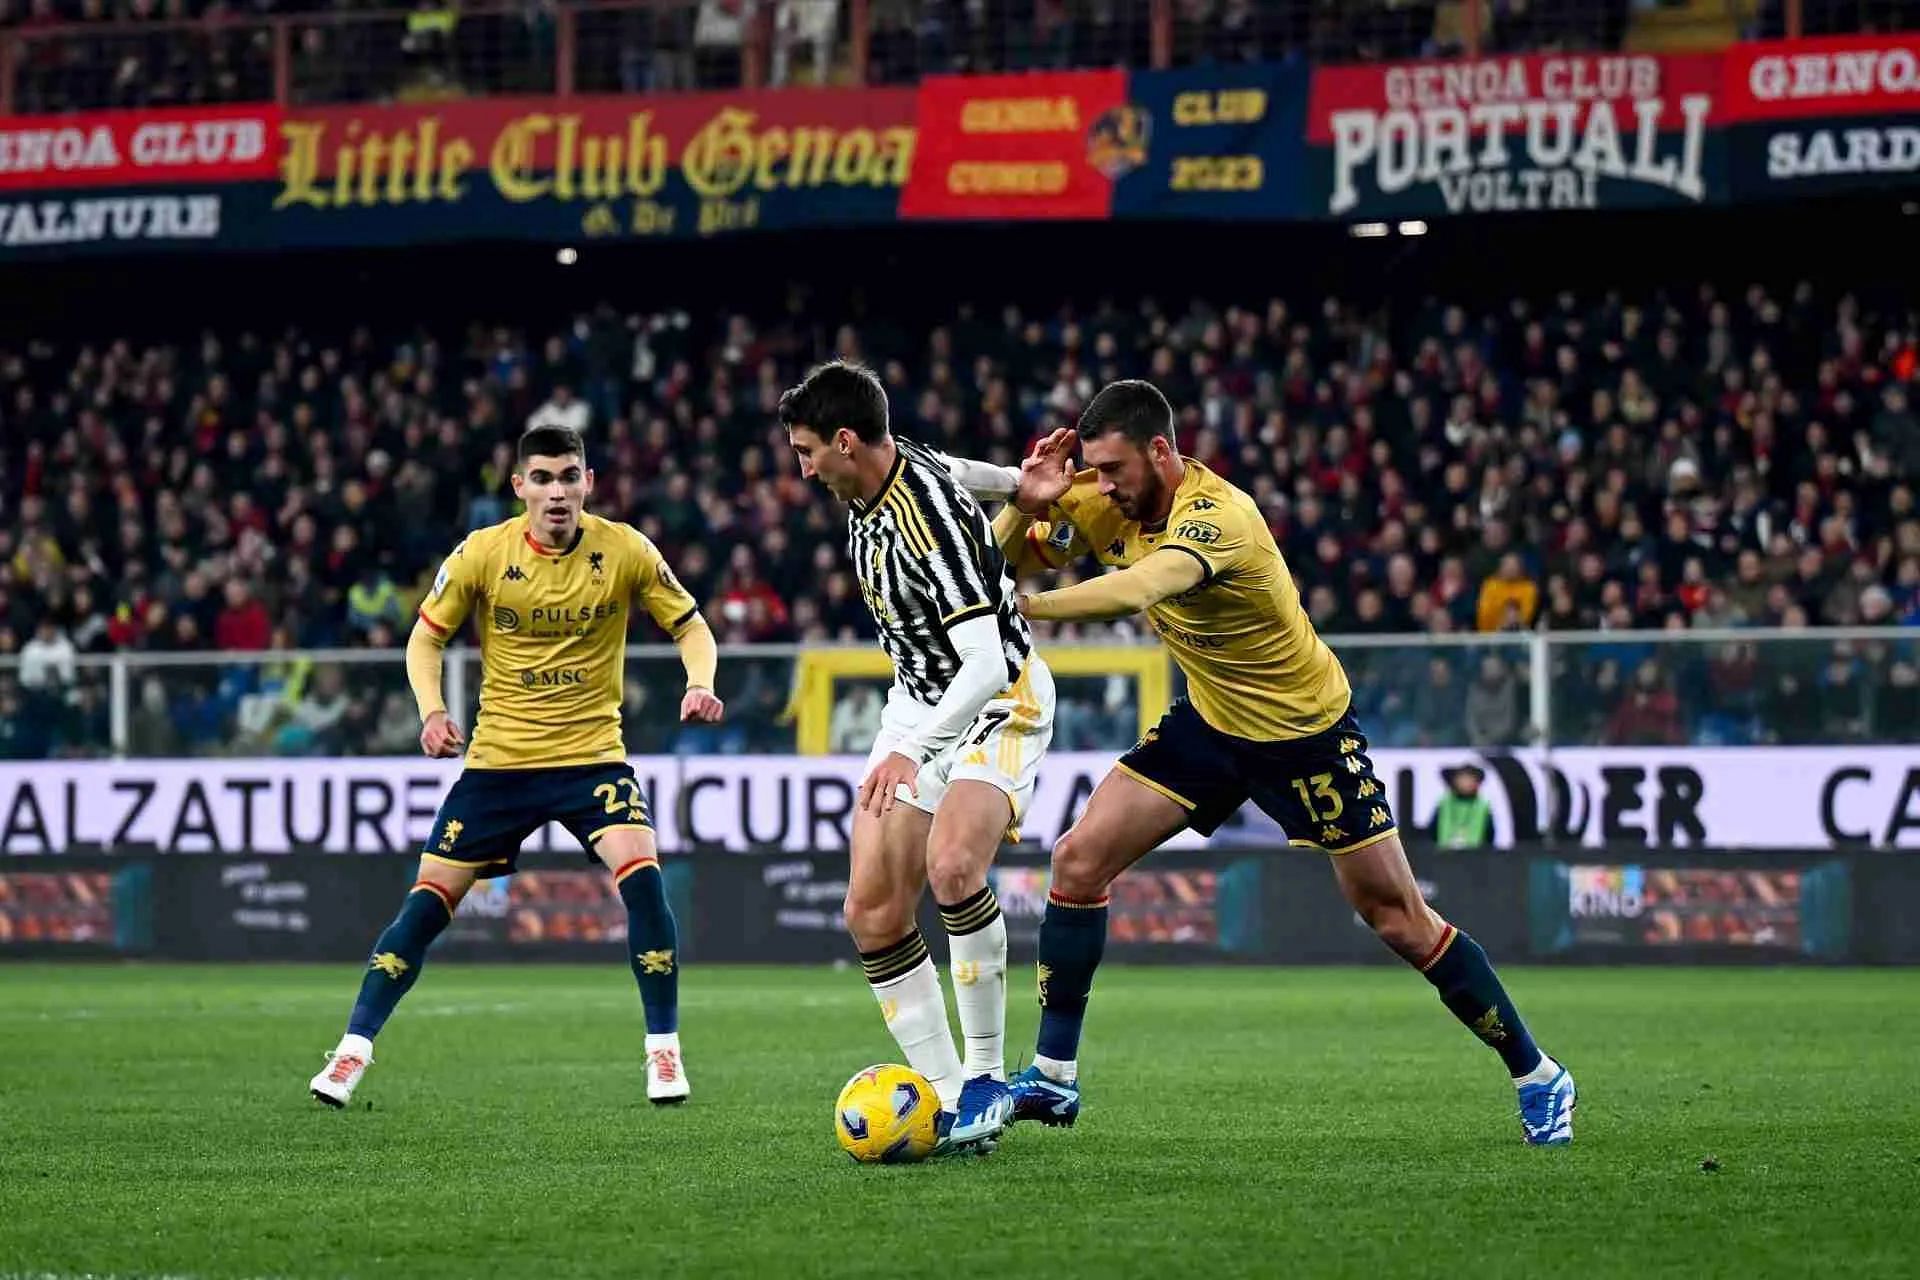 Juventus have never lost to Frosinone in their history 